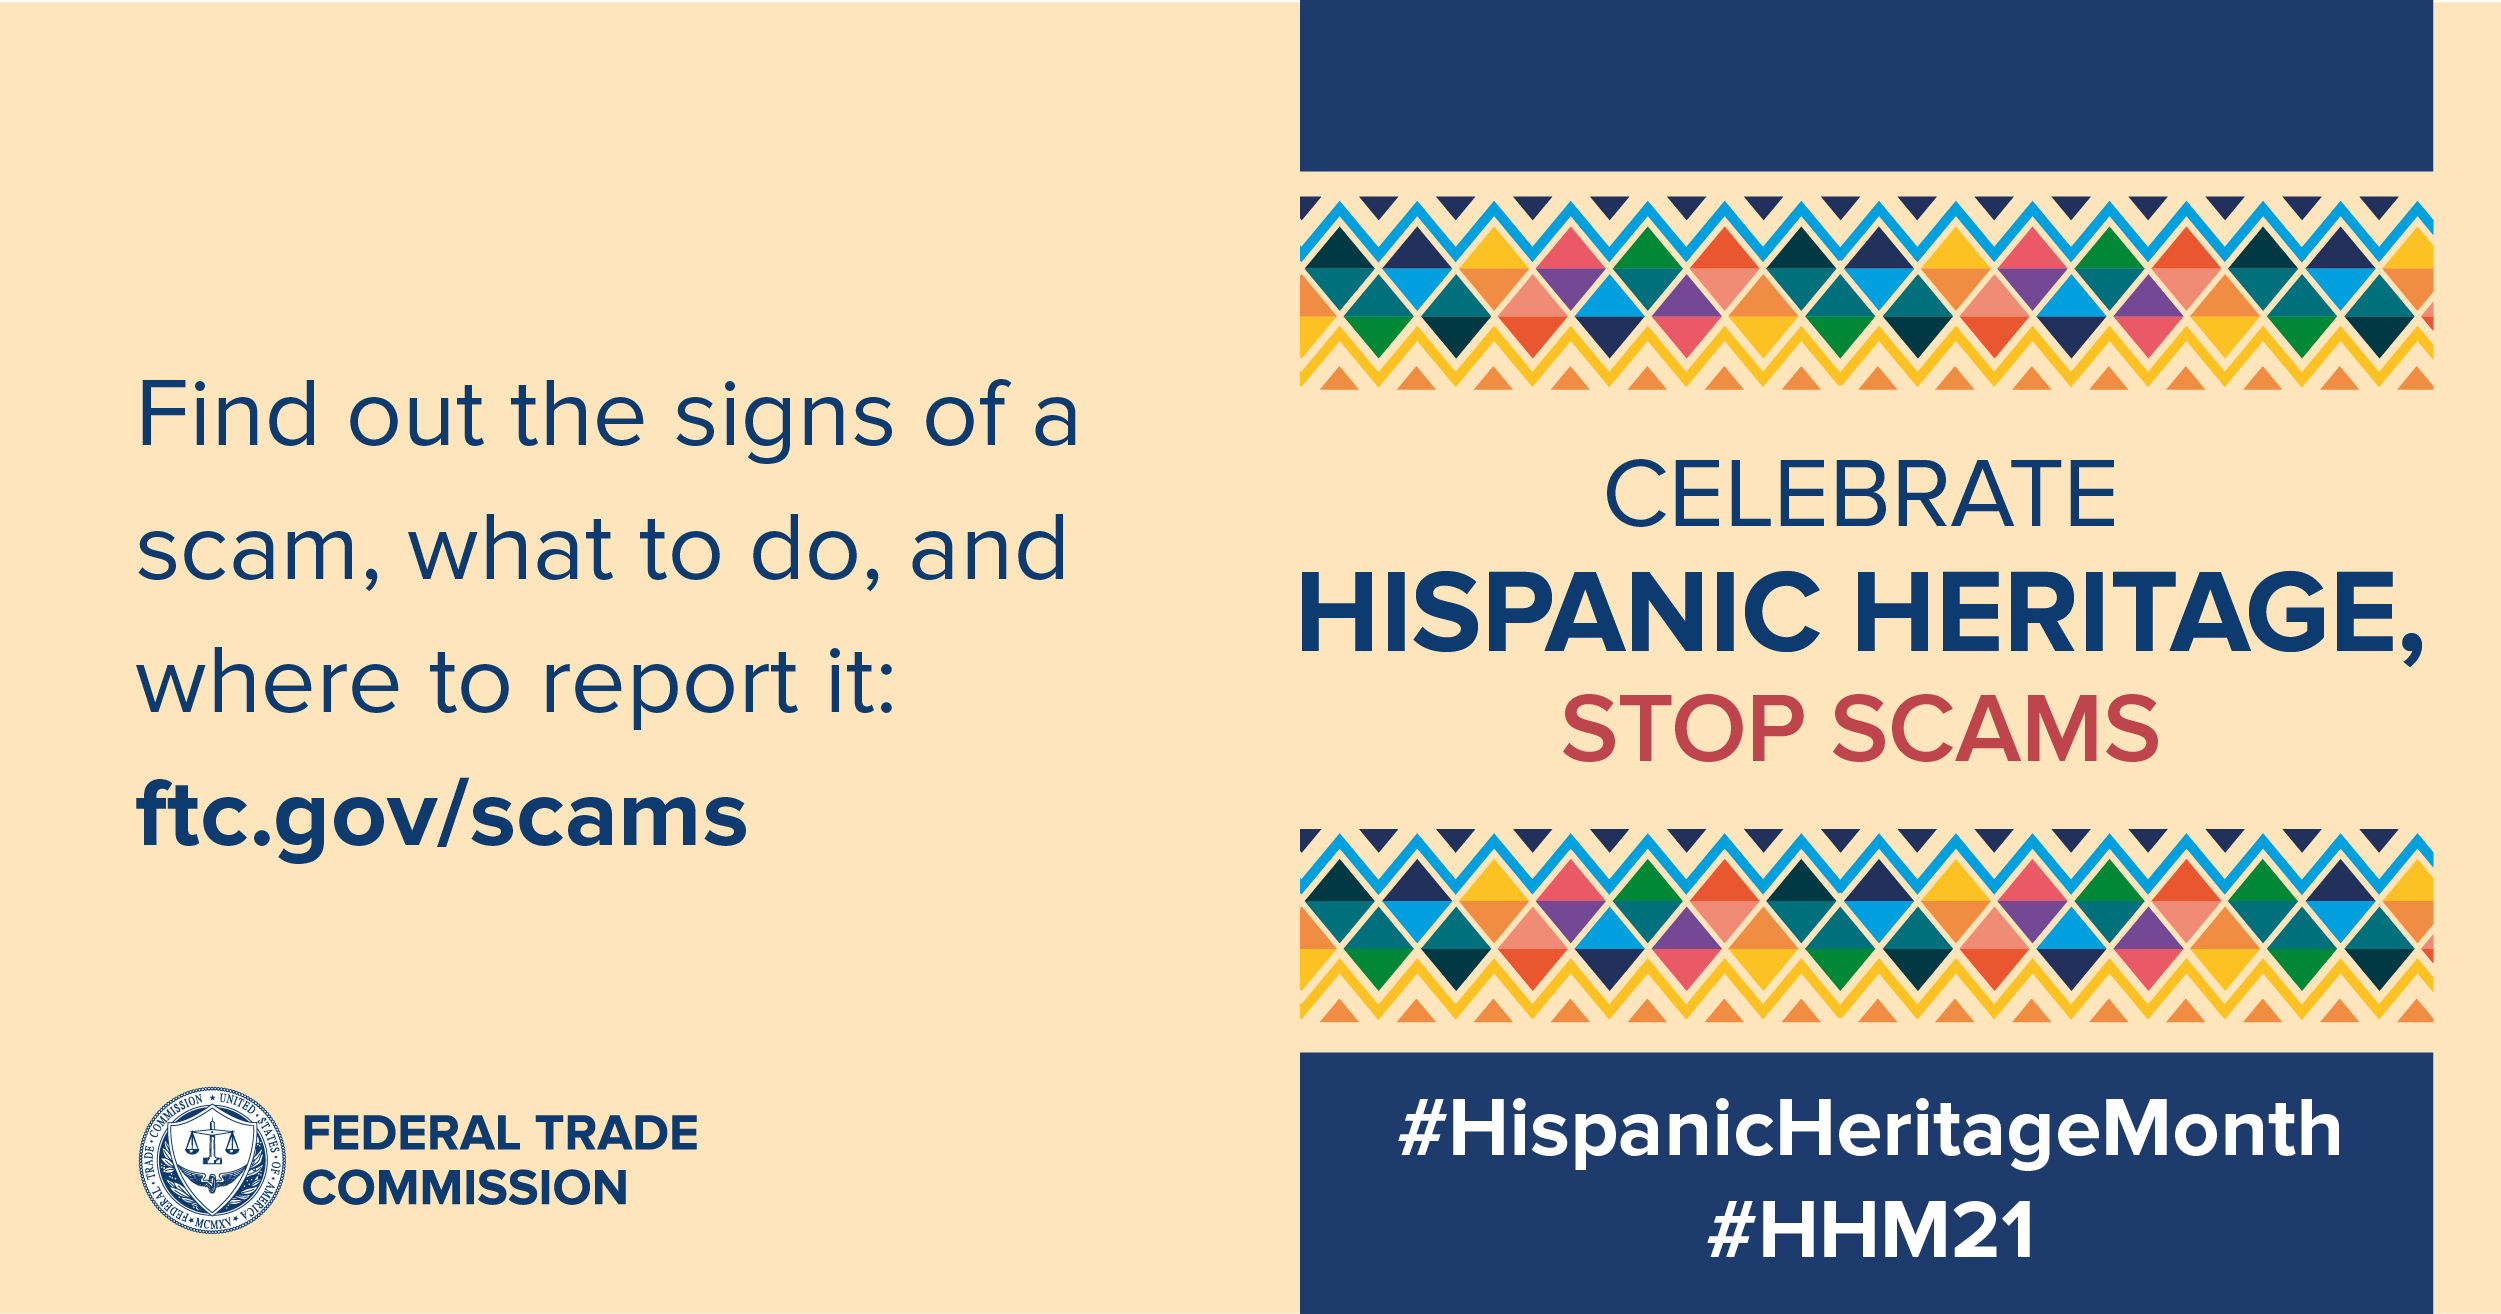 Find out the signs of a scams, what to do and where to report it. Ftc.gov/scams. Celebrate Hispanic Heritage, Stop Scams.